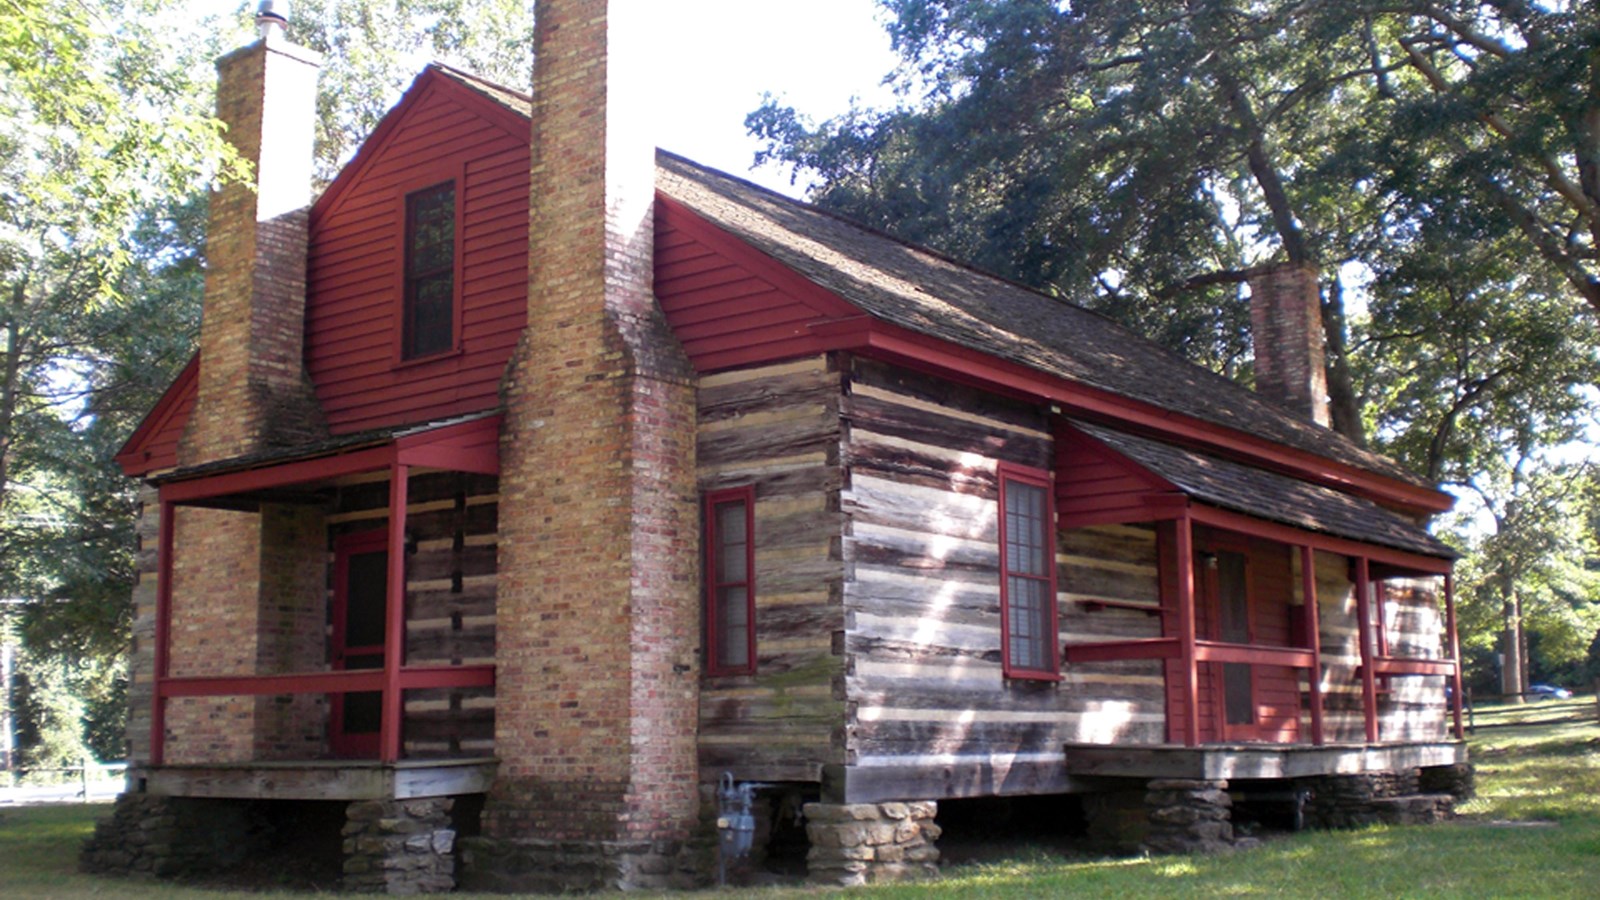 Picture showing the Kolb Farmhouse